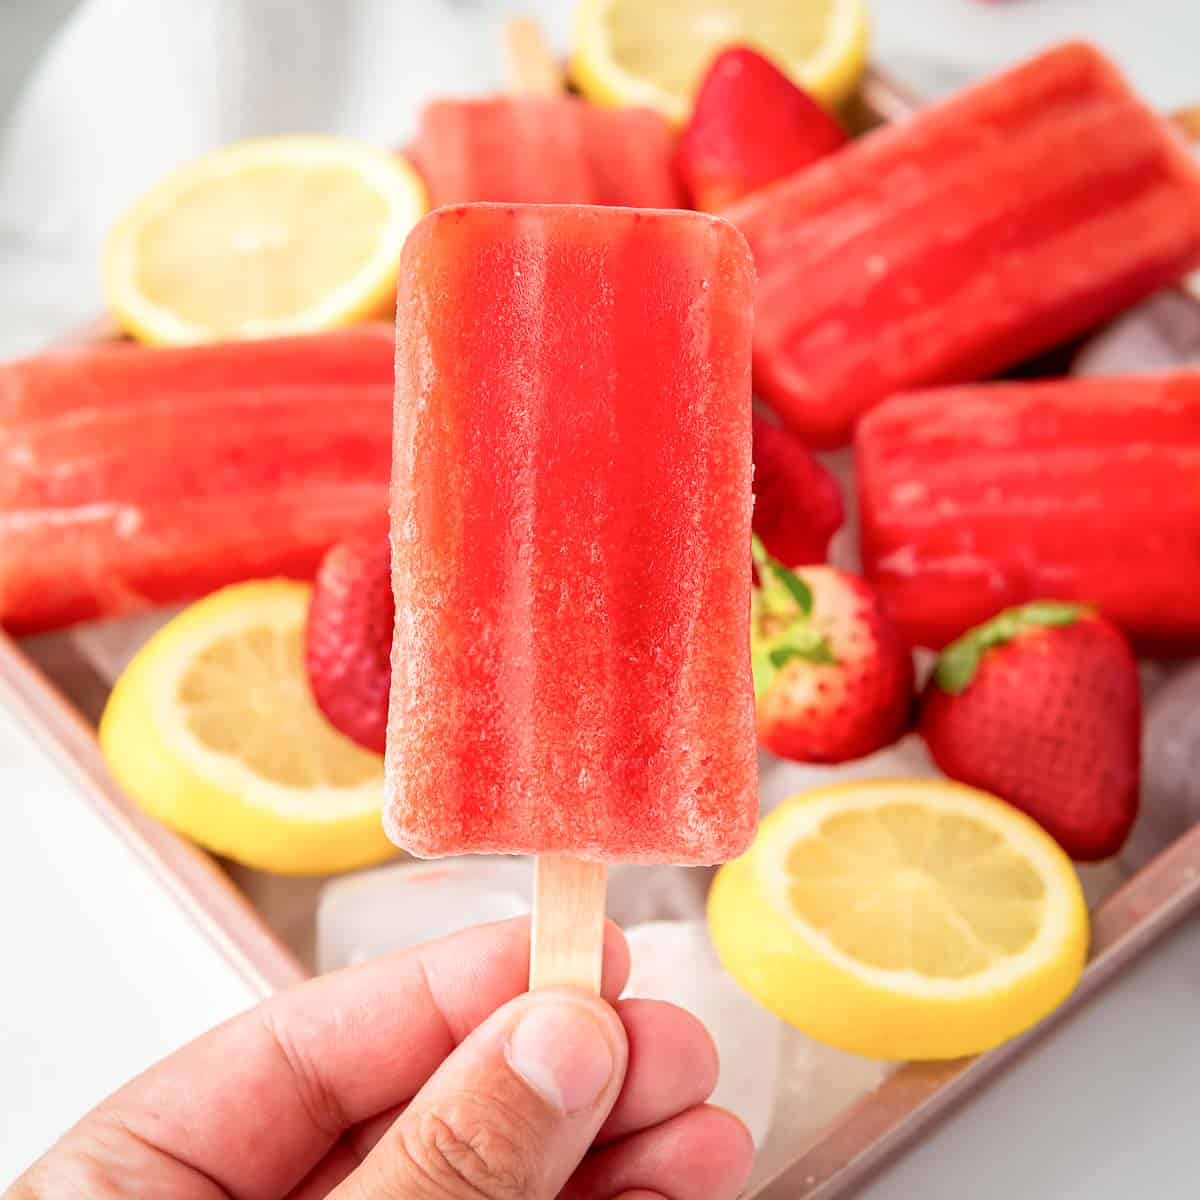 Side shot of a hand holding up one popsicle in front of a tray of popsicles laying on a bed of ice, lemon slices, and strawberries.